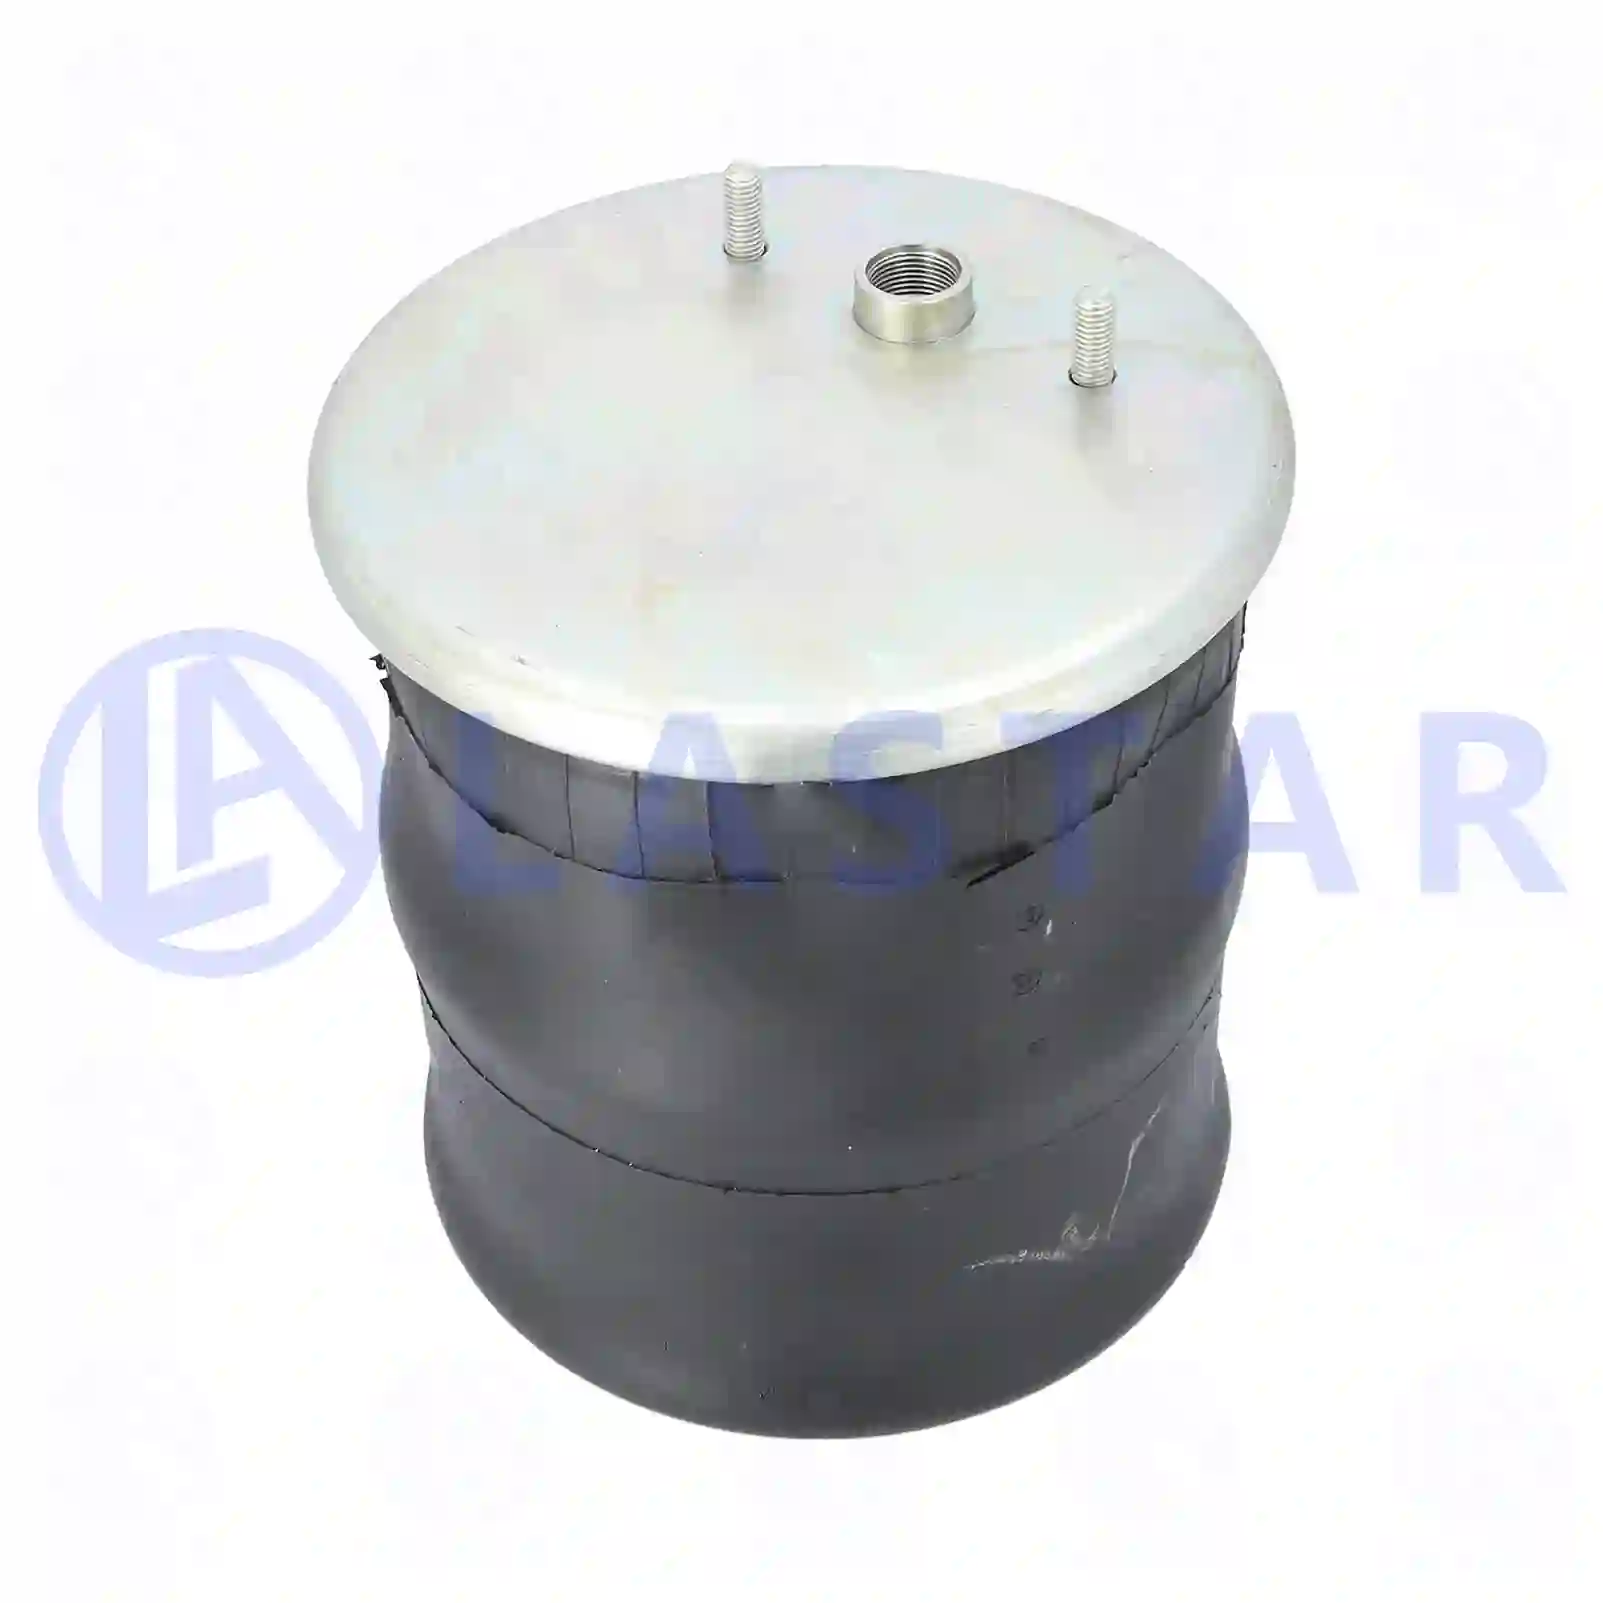 Air spring, with steel piston, 77728519, 1849374, , , , , , ||  77728519 Lastar Spare Part | Truck Spare Parts, Auotomotive Spare Parts Air spring, with steel piston, 77728519, 1849374, , , , , , ||  77728519 Lastar Spare Part | Truck Spare Parts, Auotomotive Spare Parts